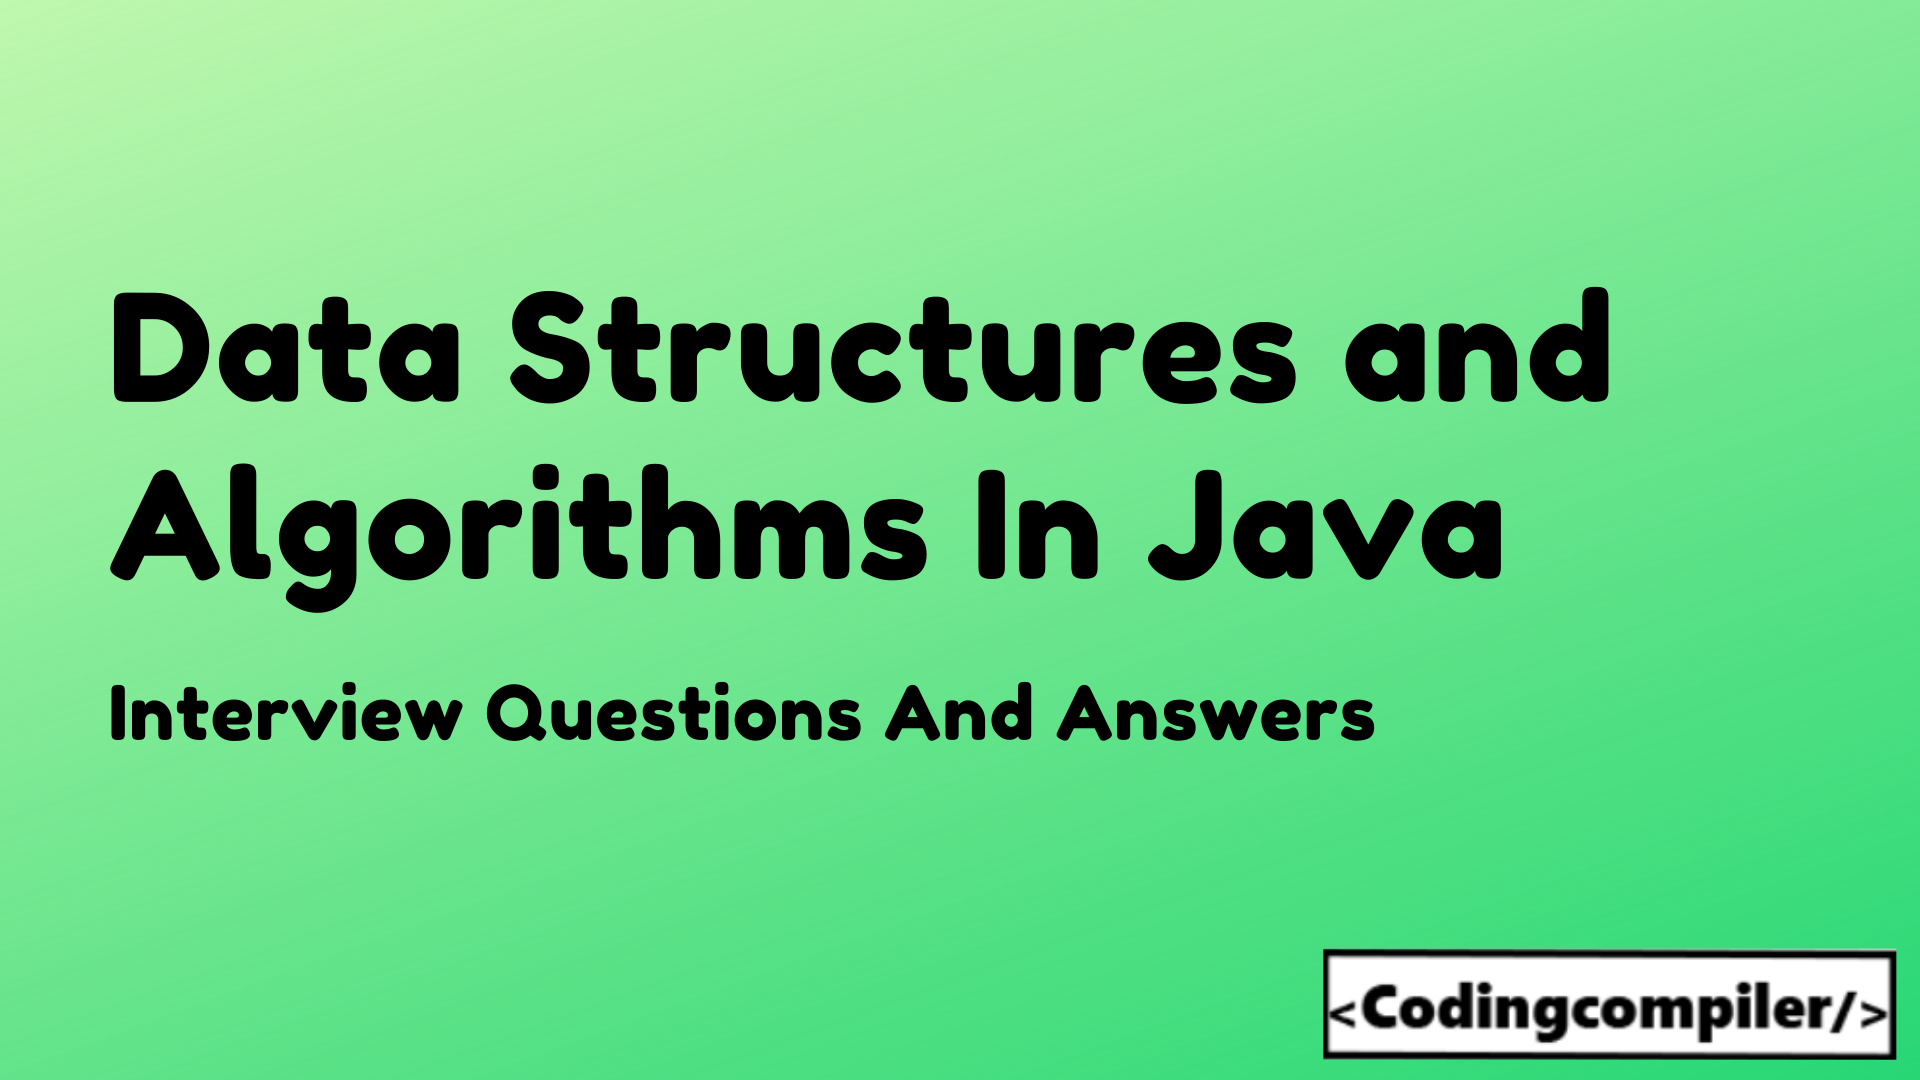 Data Structures And Algorithms in Java Interview Questions